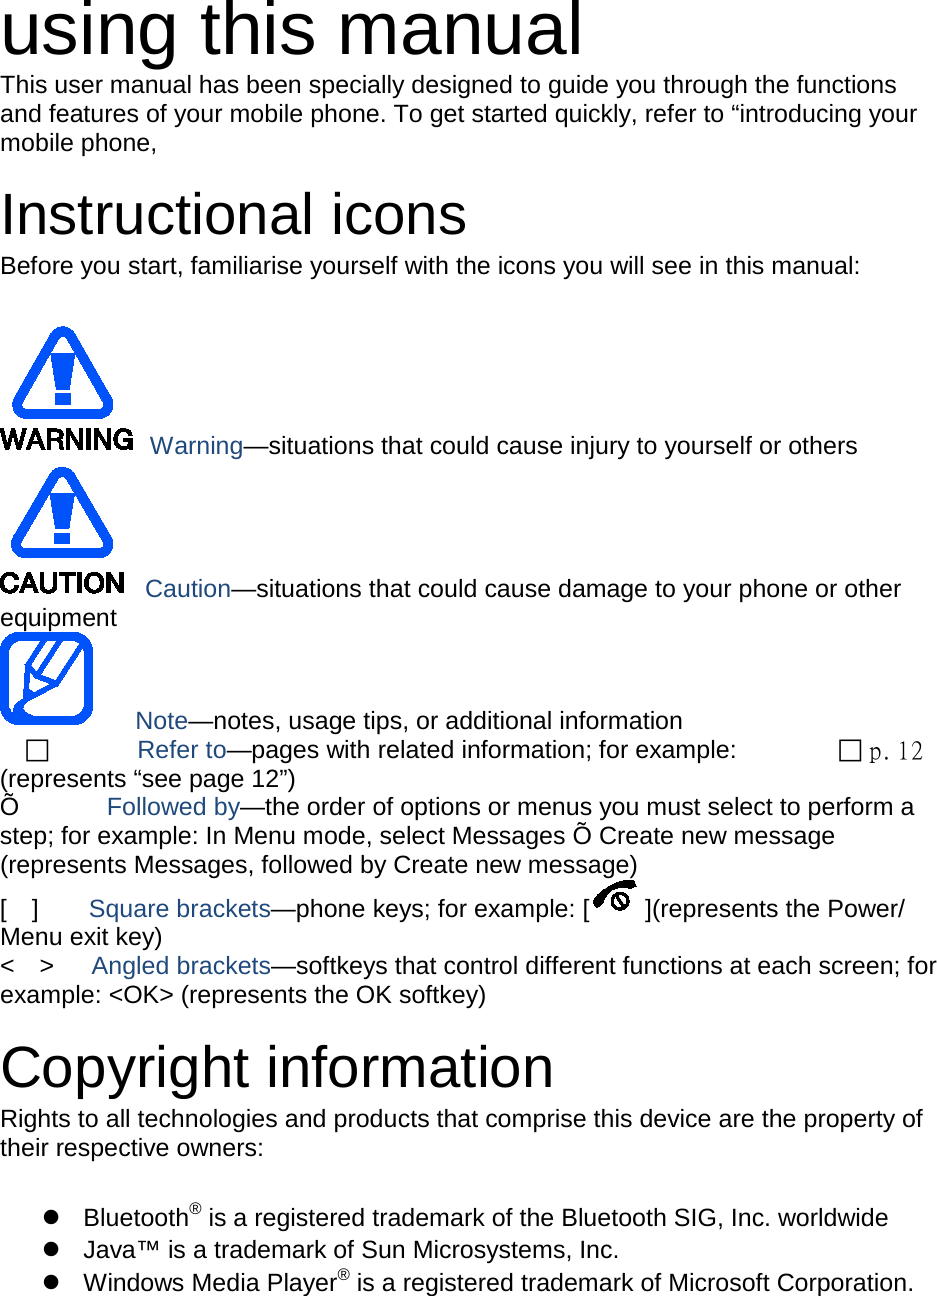 using this manual This user manual has been specially designed to guide you through the functions and features of your mobile phone. To get started quickly, refer to “introducing your mobile phone,  Instructional icons Before you start, familiarise yourself with the icons you will see in this manual:     Warning—situations that could cause injury to yourself or others  Caution—situations that could cause damage to your phone or other equipment    Note—notes, usage tips, or additional information          Refer to—pages with related information; for example:   p. 12 (represents “see page 12”) Õ       Followed by—the order of options or menus you must select to perform a step; for example: In Menu mode, select Messages Õ Create new message (represents Messages, followed by Create new message) [  ]    Square brackets—phone keys; for example: [ ](represents the Power/ Menu exit key) &lt;  &gt;   Angled brackets—softkeys that control different functions at each screen; for example: &lt;OK&gt; (represents the OK softkey)  Copyright information Rights to all technologies and products that comprise this device are the property of their respective owners:   Bluetooth® is a registered trademark of the Bluetooth SIG, Inc. worldwide  Java™ is a trademark of Sun Microsystems, Inc.  Windows Media Player® is a registered trademark of Microsoft Corporation.  